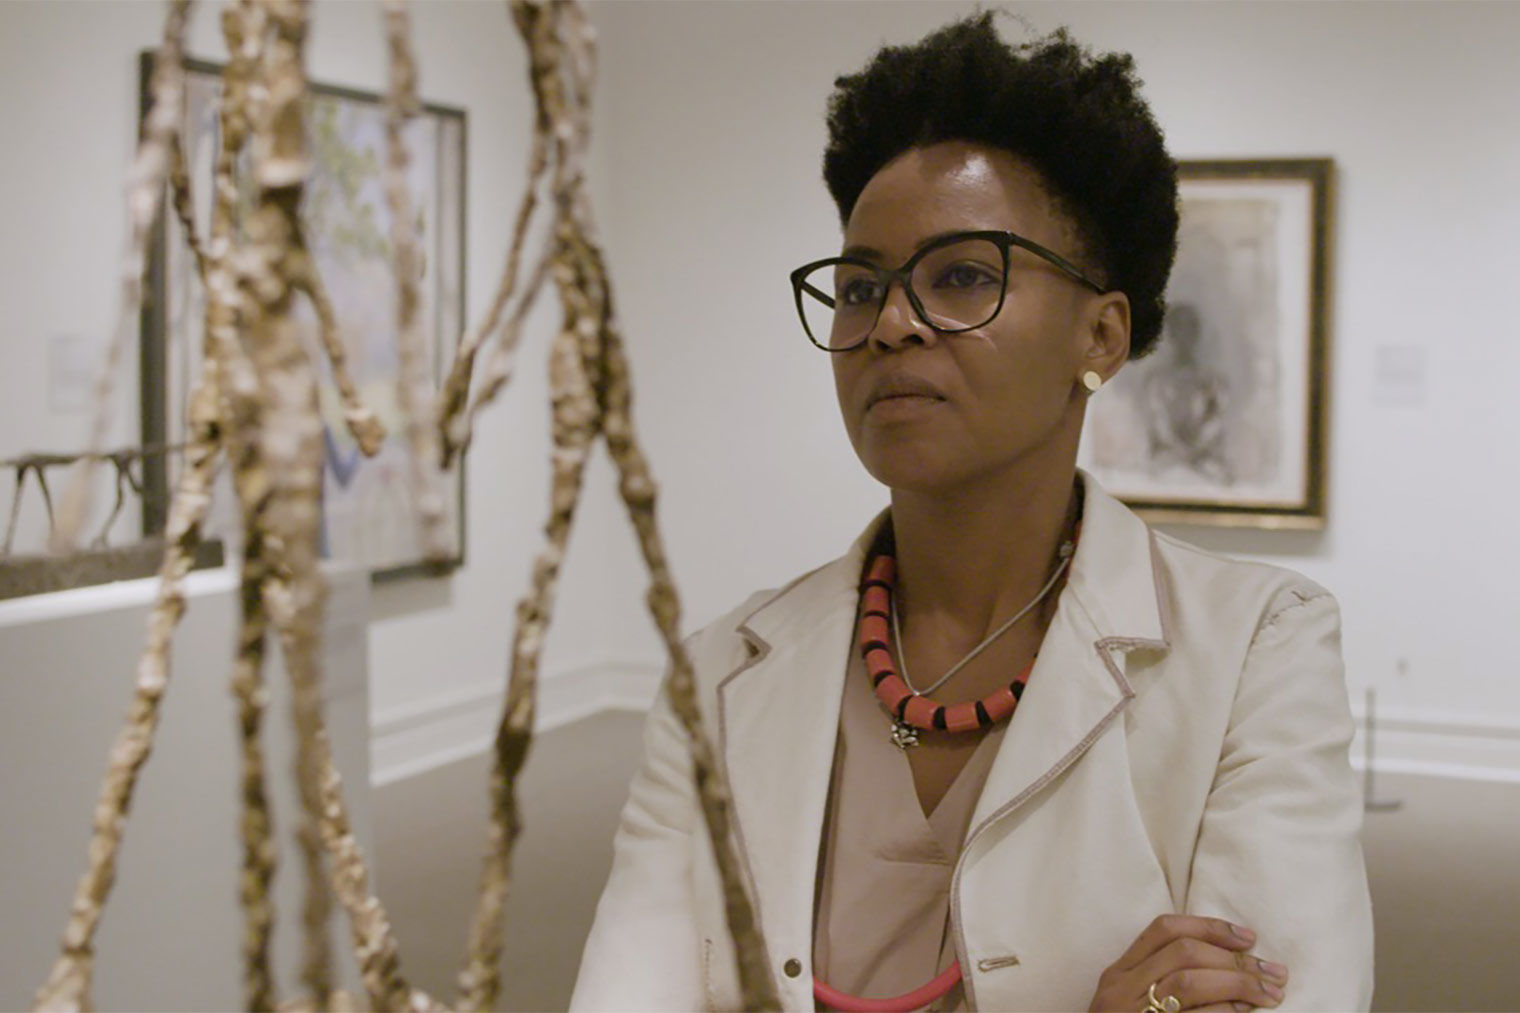 The artist Wangechi Mutu, a tall woman in a light coat and glasses, looks at a Giacometti sculpture of three elongated humans